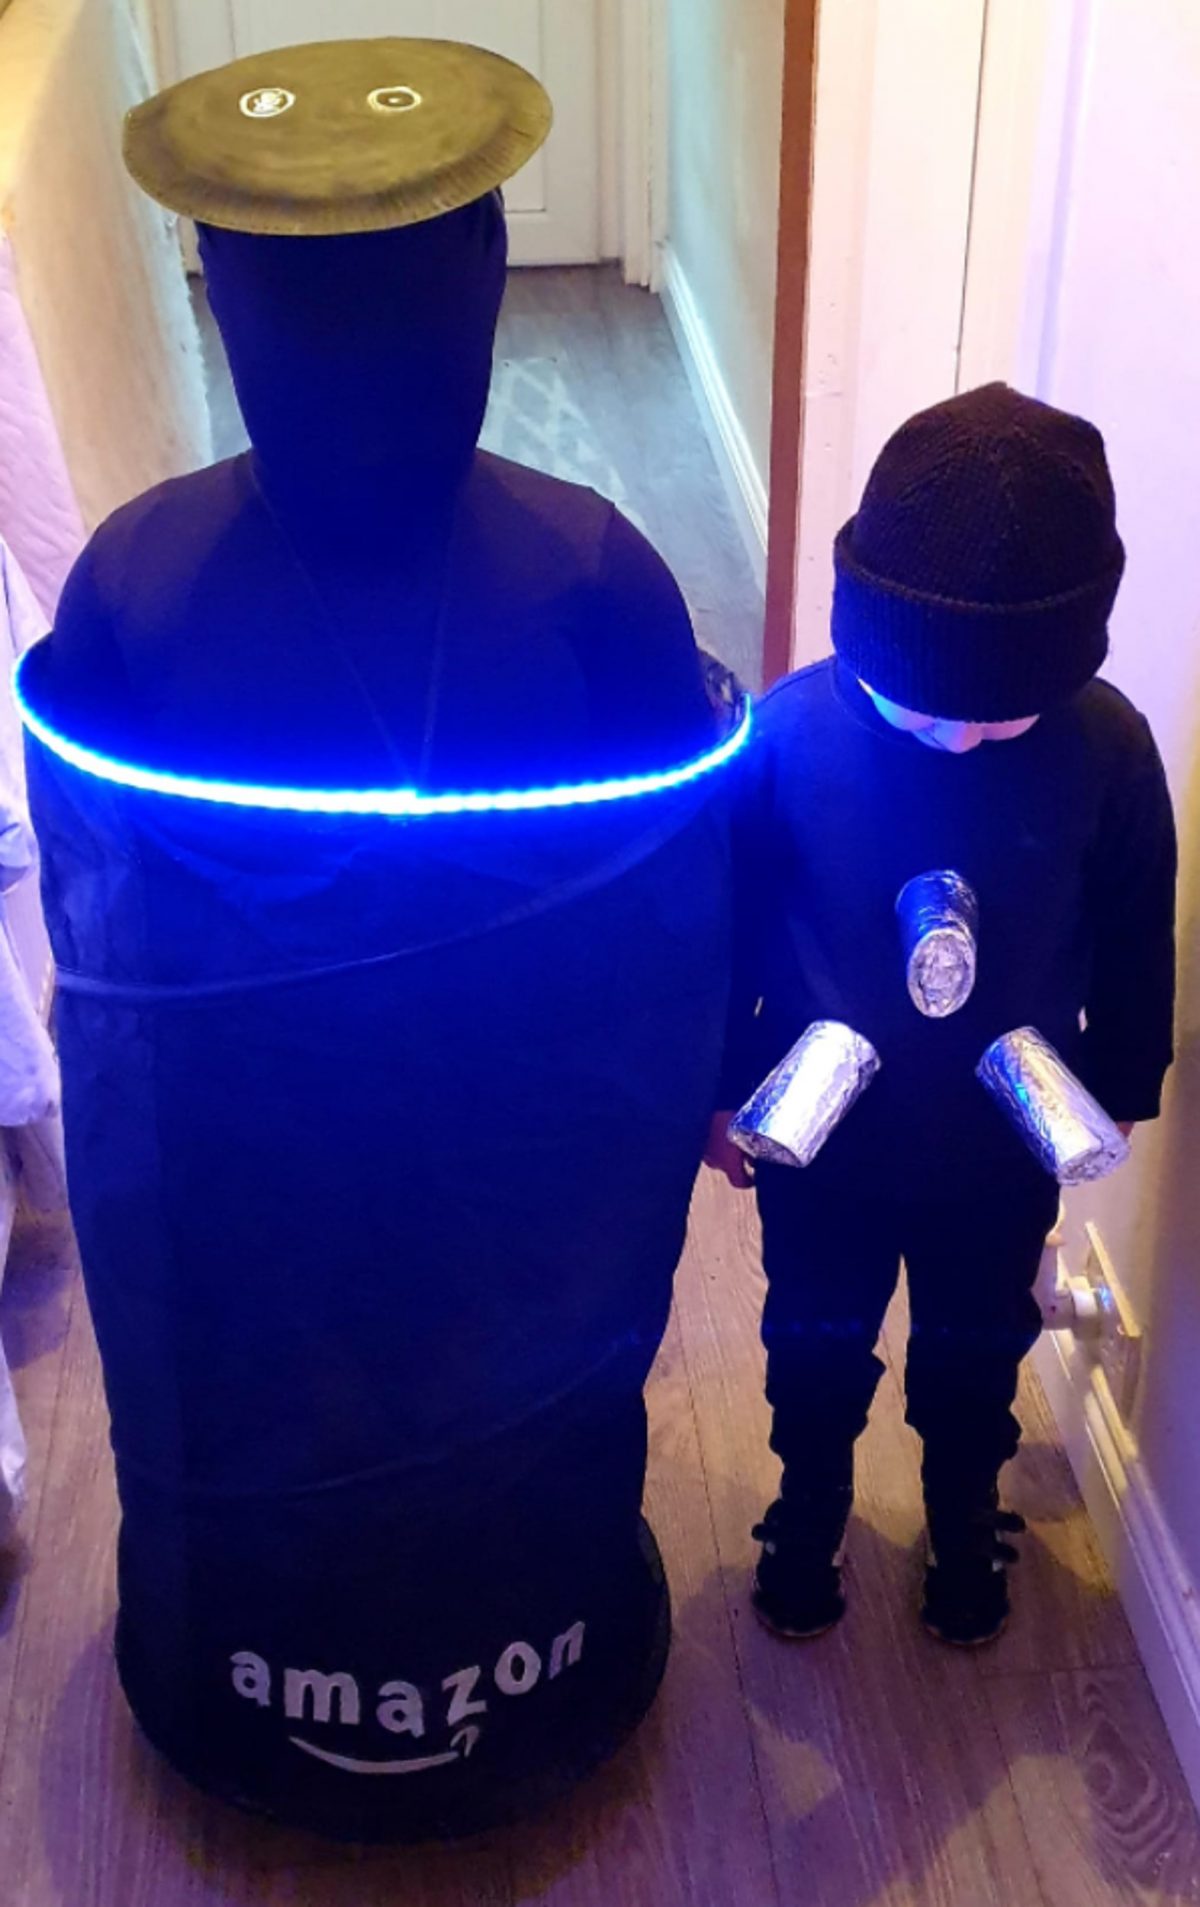 The cousins dressed up as Alexa and a plug